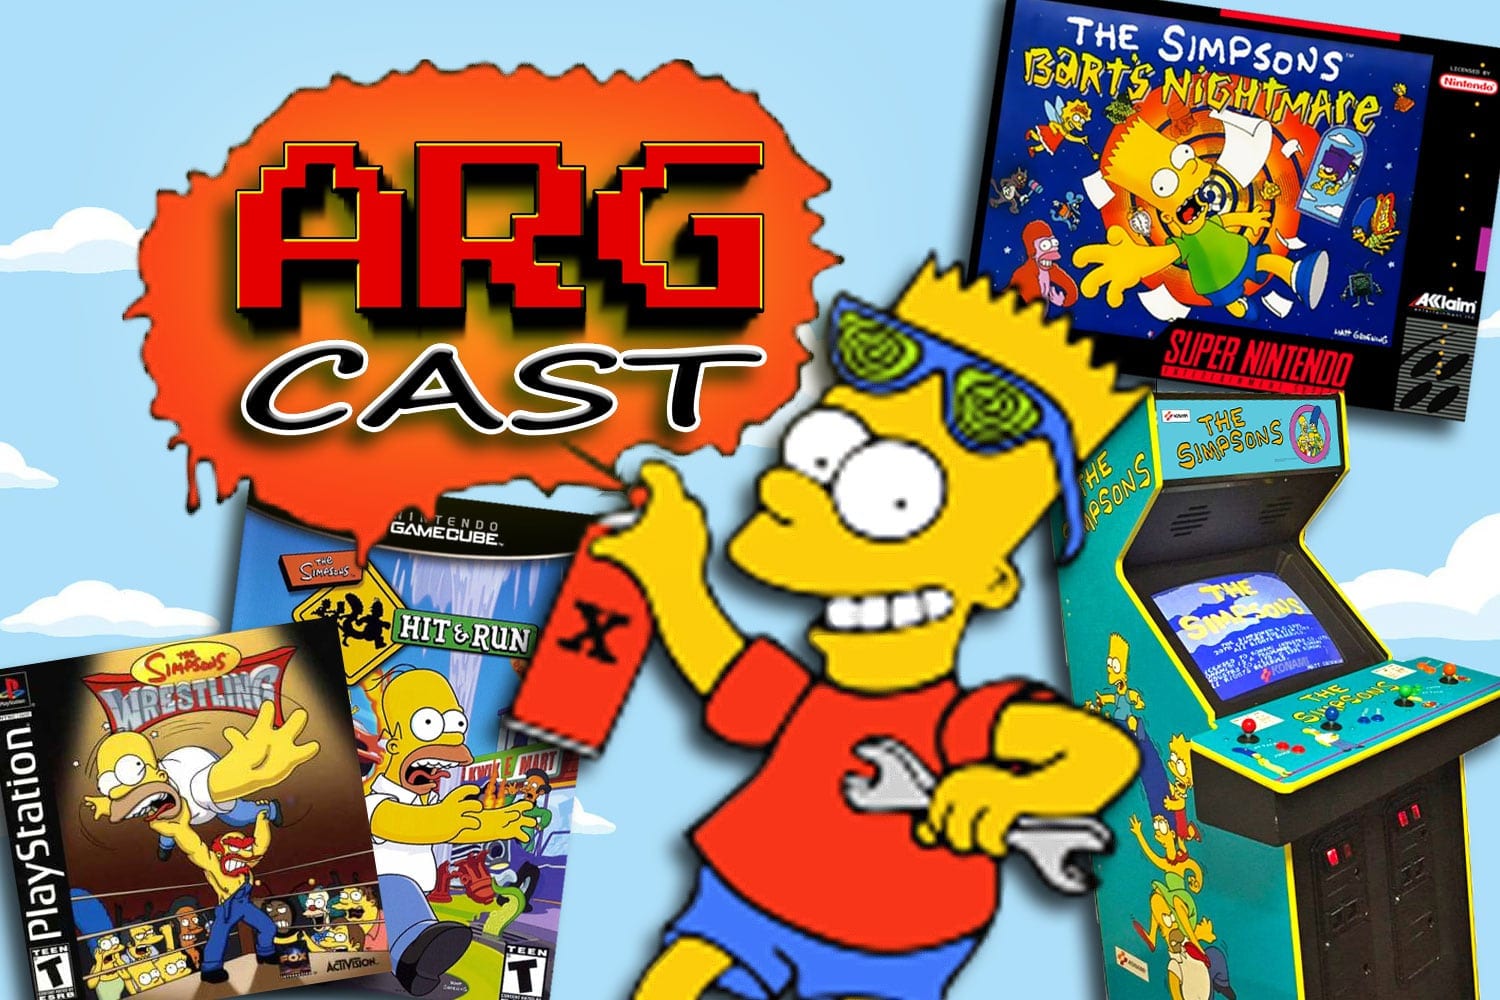 ARGcast #119: The Simpsons History in Retro Gaming with Bill Gardner